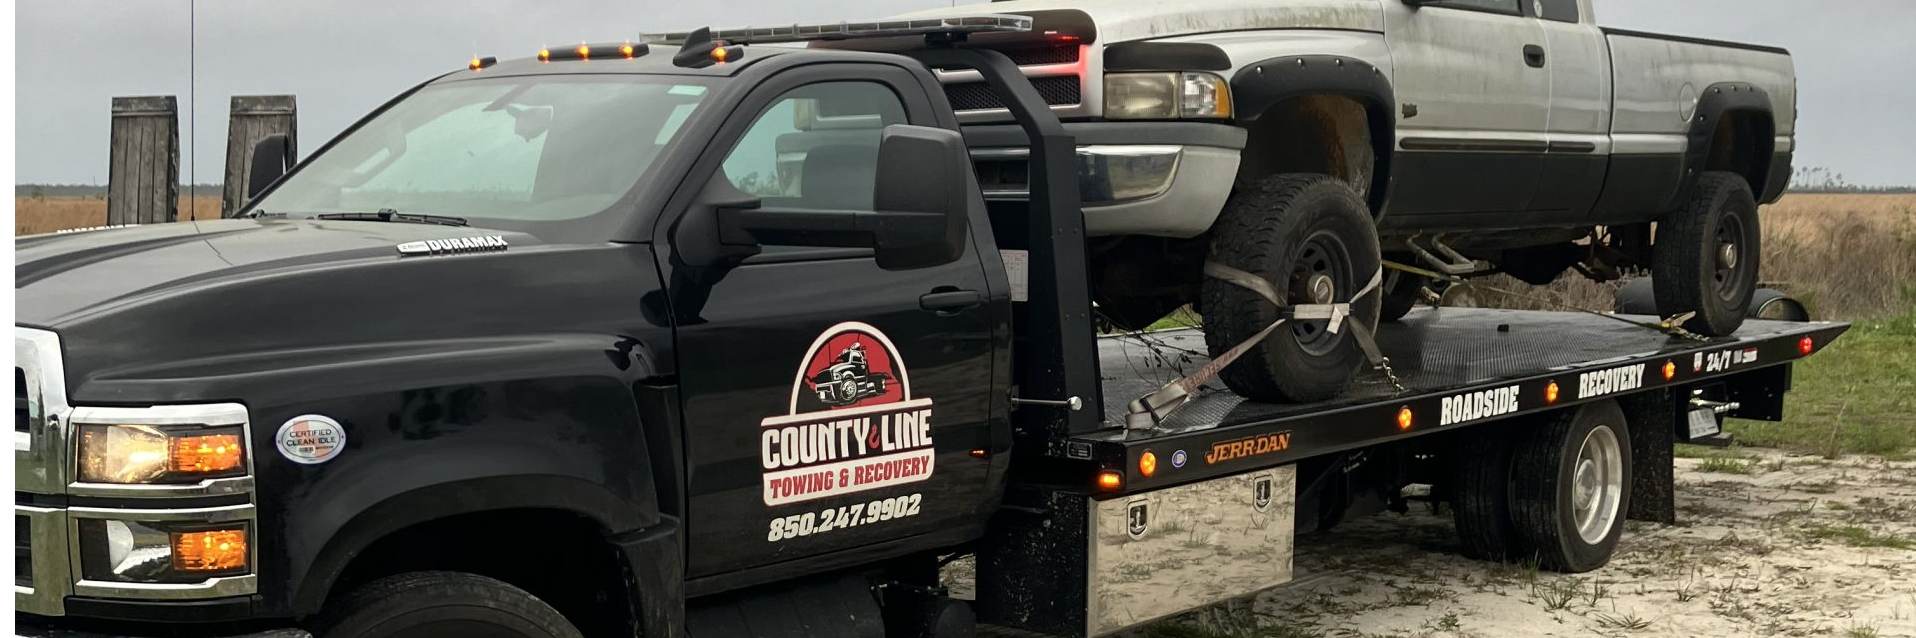 County Line Towing & Recovery  Towing.com Profile Banner